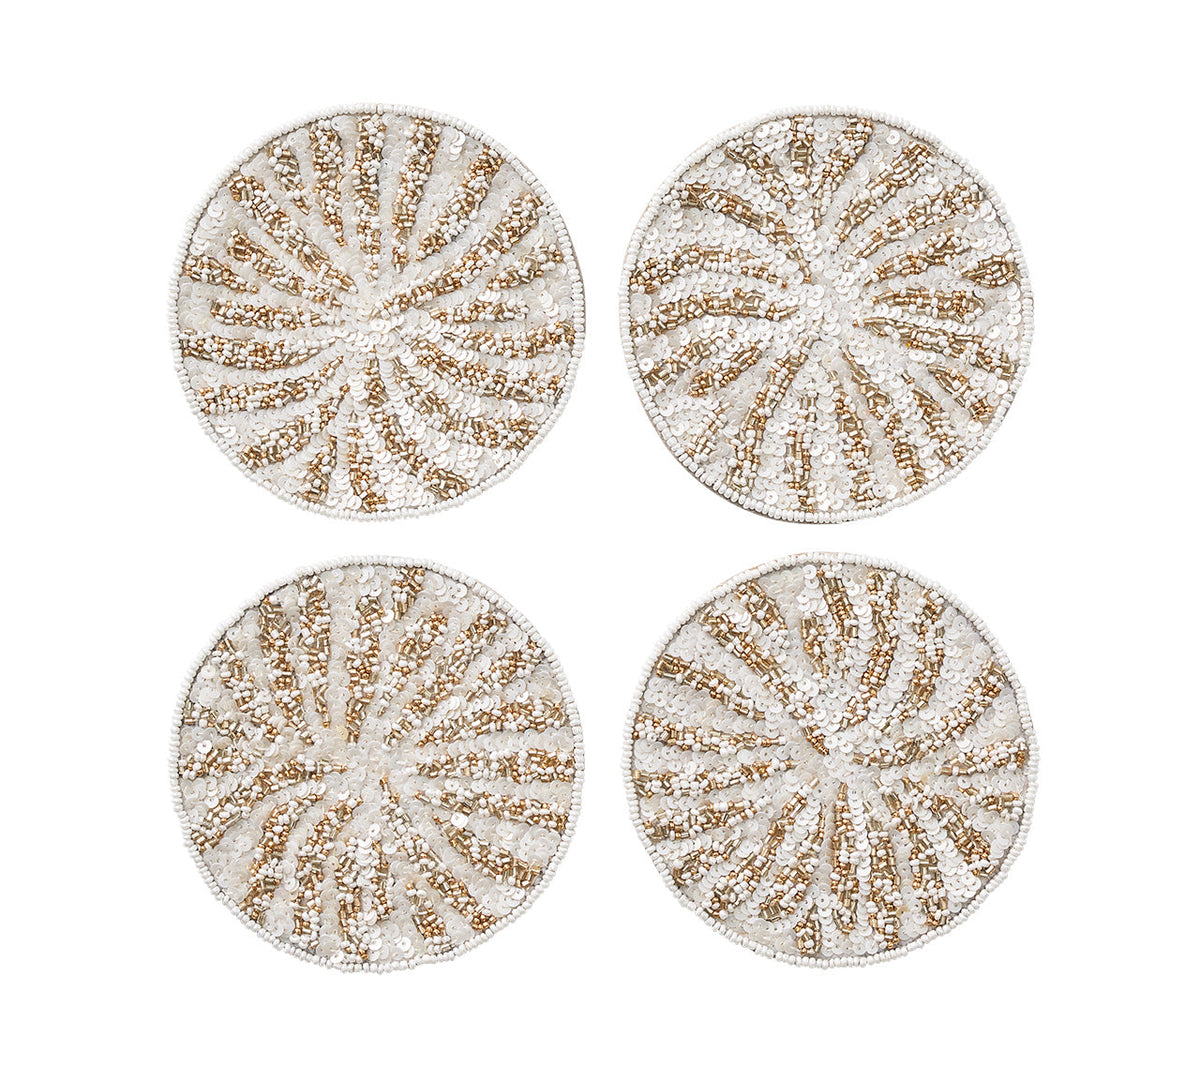 Beaded Fireworks Coaster in metallic gold and silver